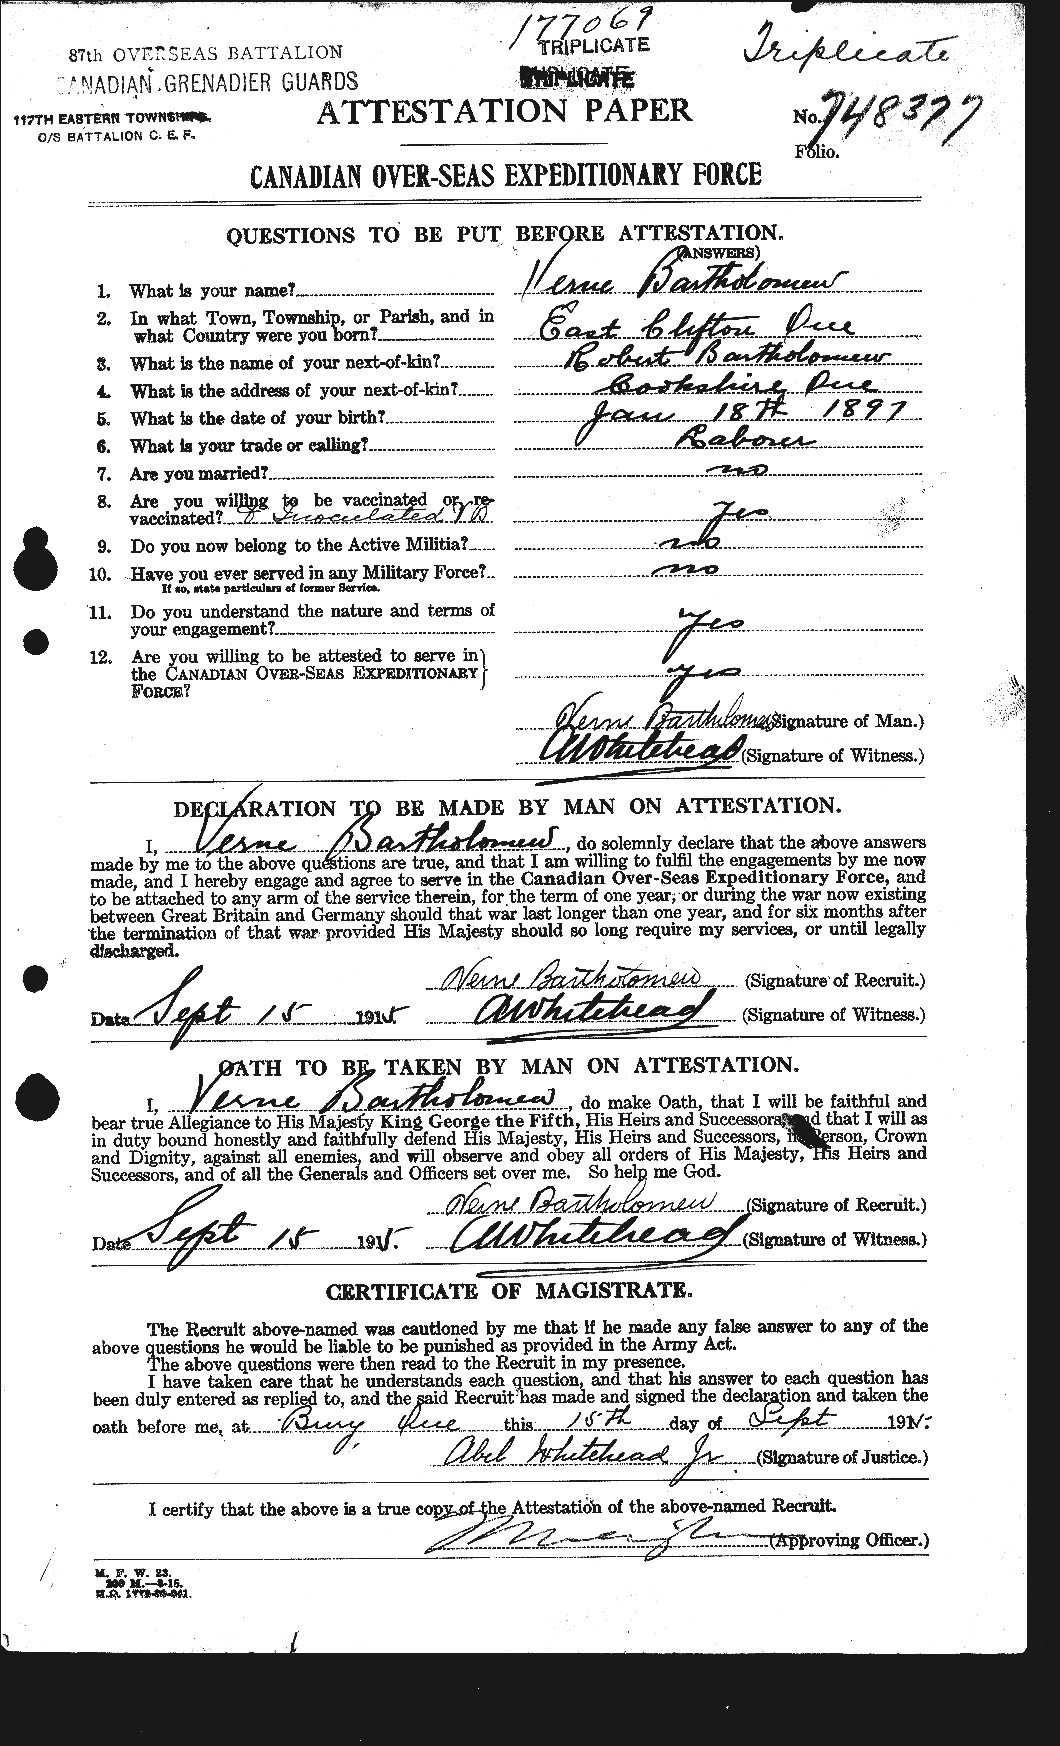 Personnel Records of the First World War - CEF 229122a